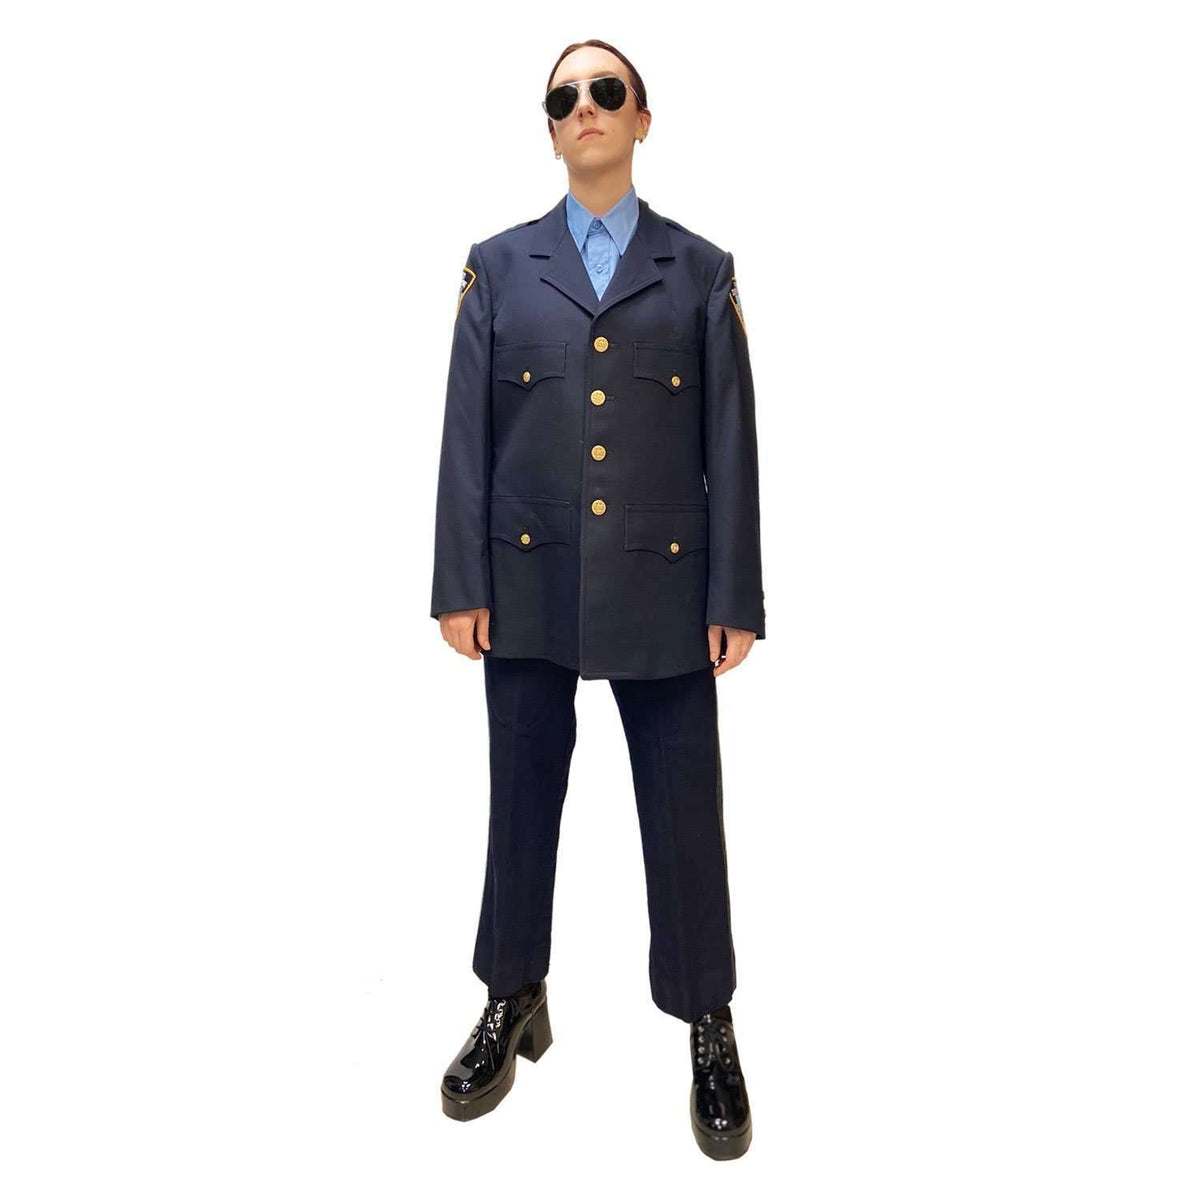 Production Quality Rental NYPD Officer w/Coat